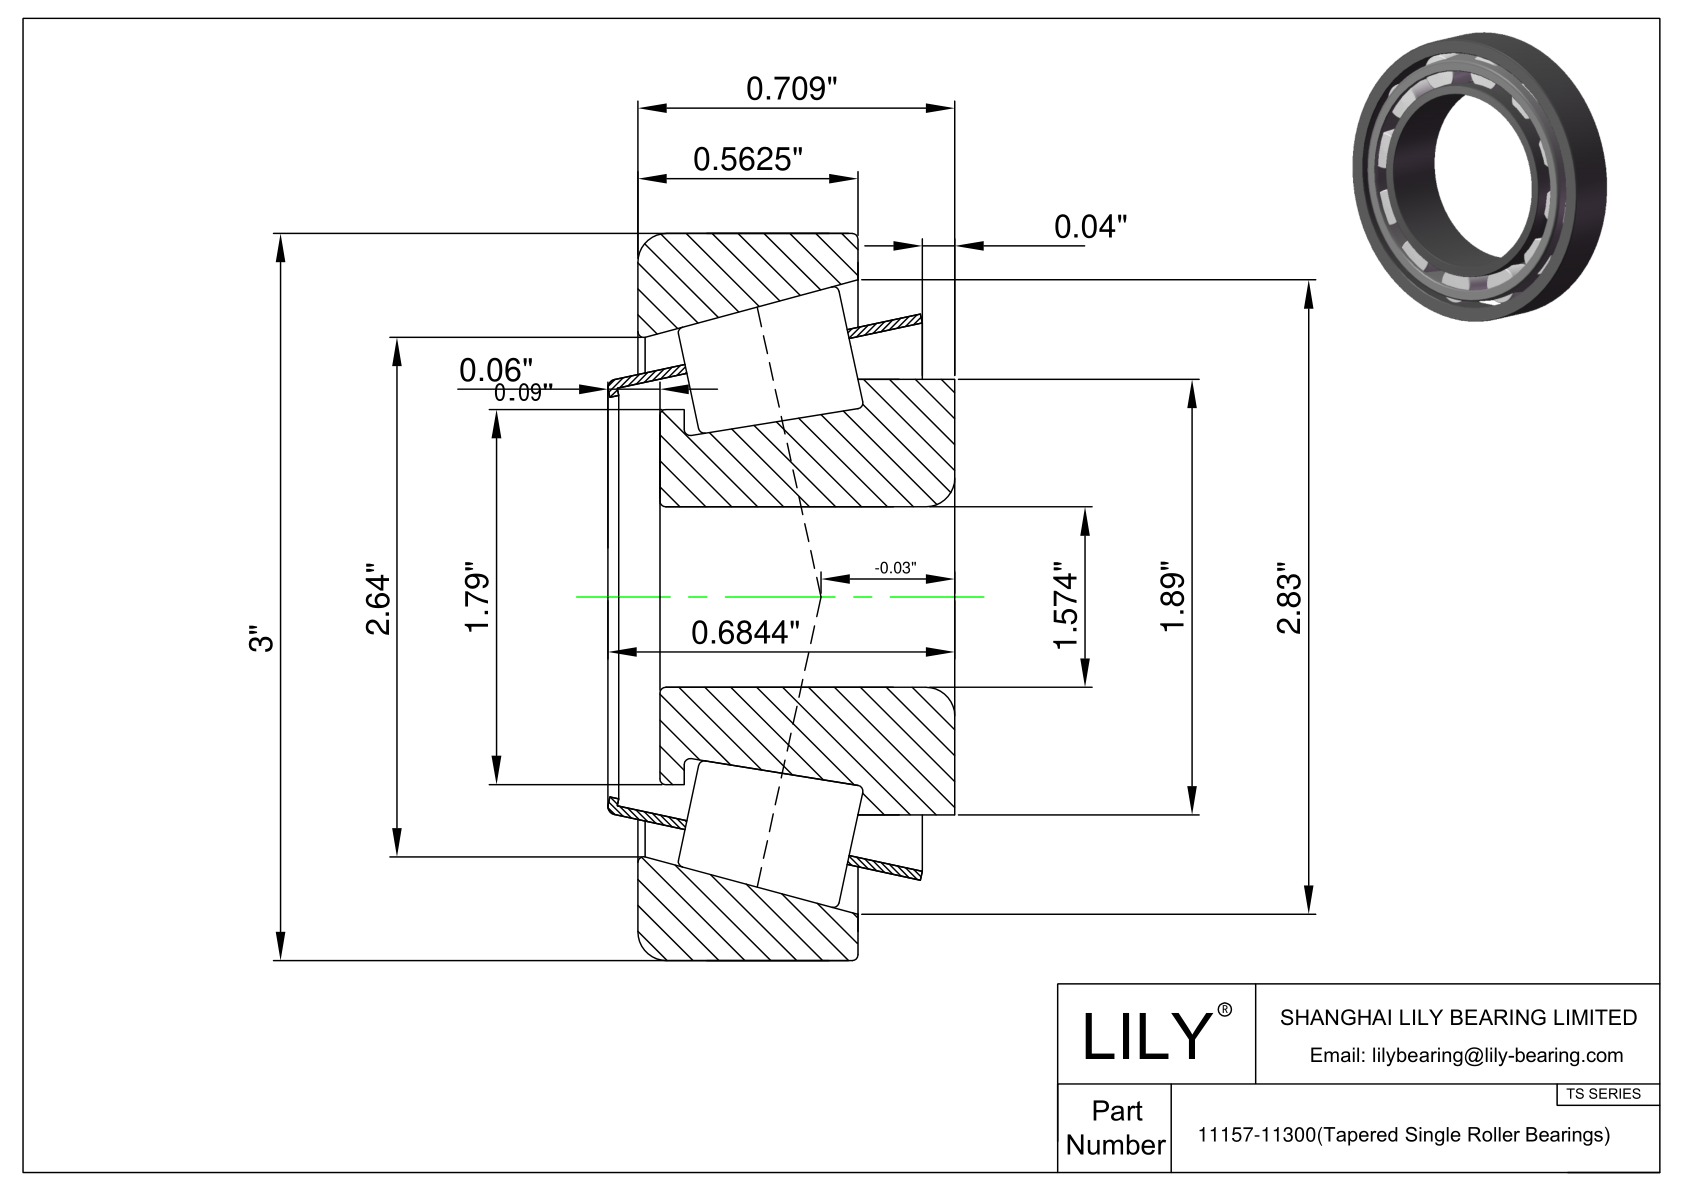 11157-11300 TS (Tapered Single Roller Bearings) (Imperial) cad drawing